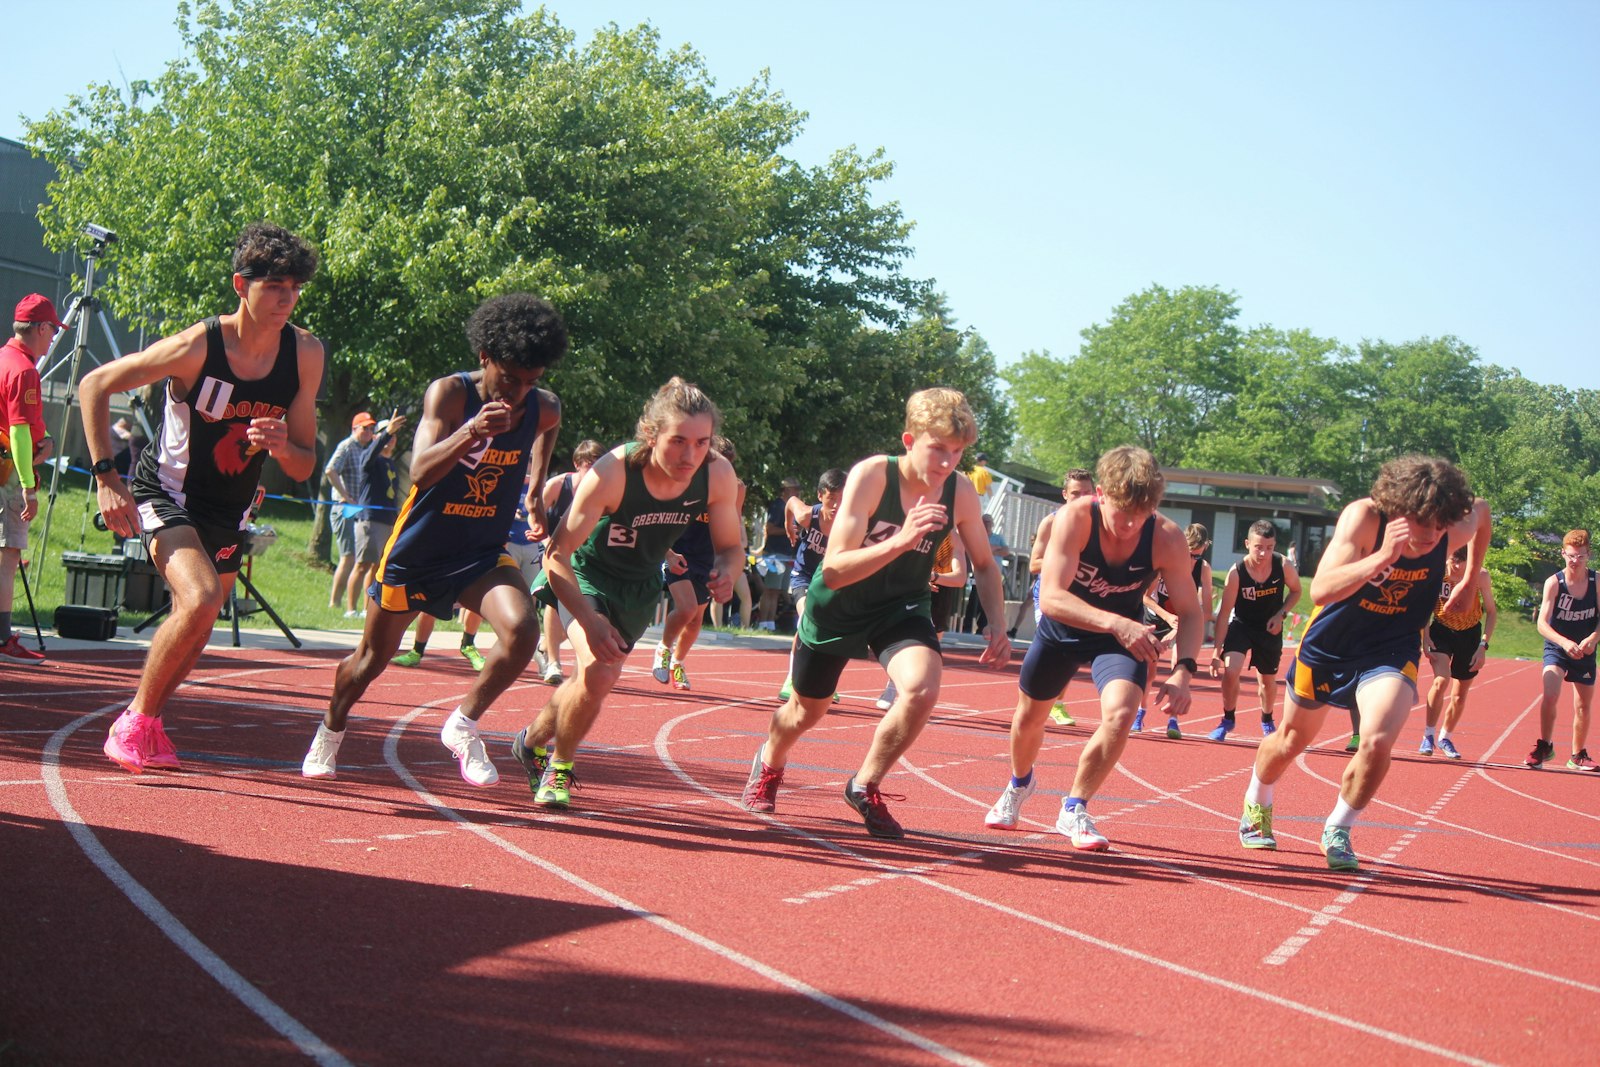 Runners take off from the starting line in the boys’ 1600 meter run. Royal Oak Shrine’s Abenezer Cerone (second from left) was the race winner, edging Marine City Cardinal Mooney’s Matthew Zammit (left).